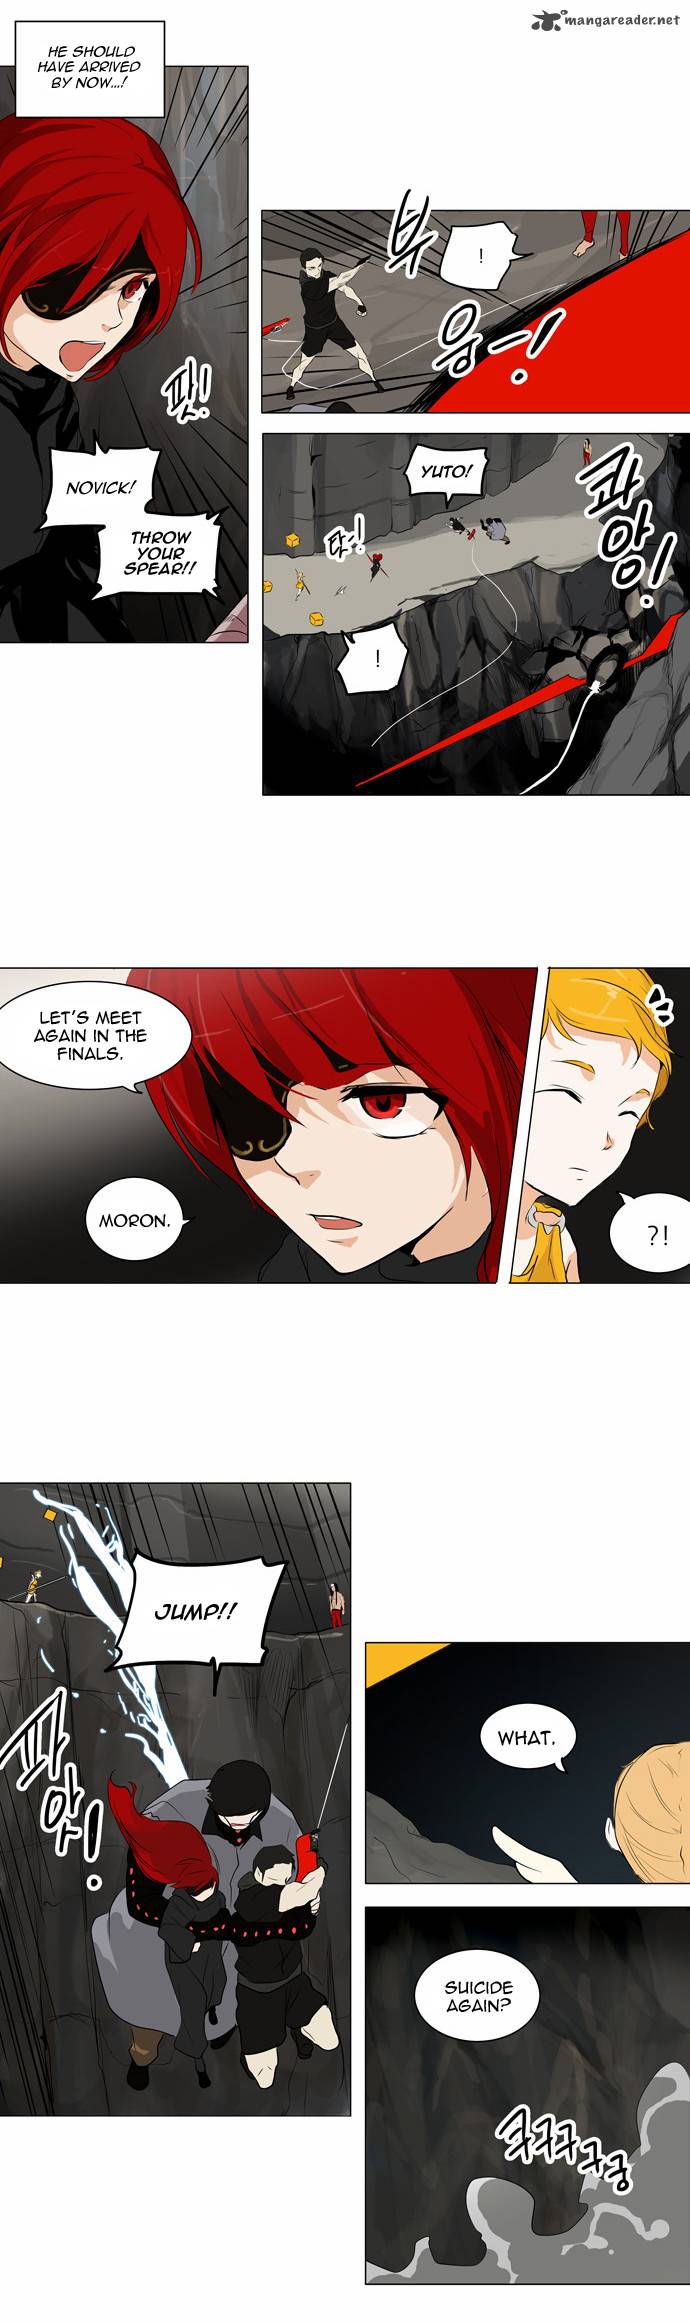 Tower Of God 172 23